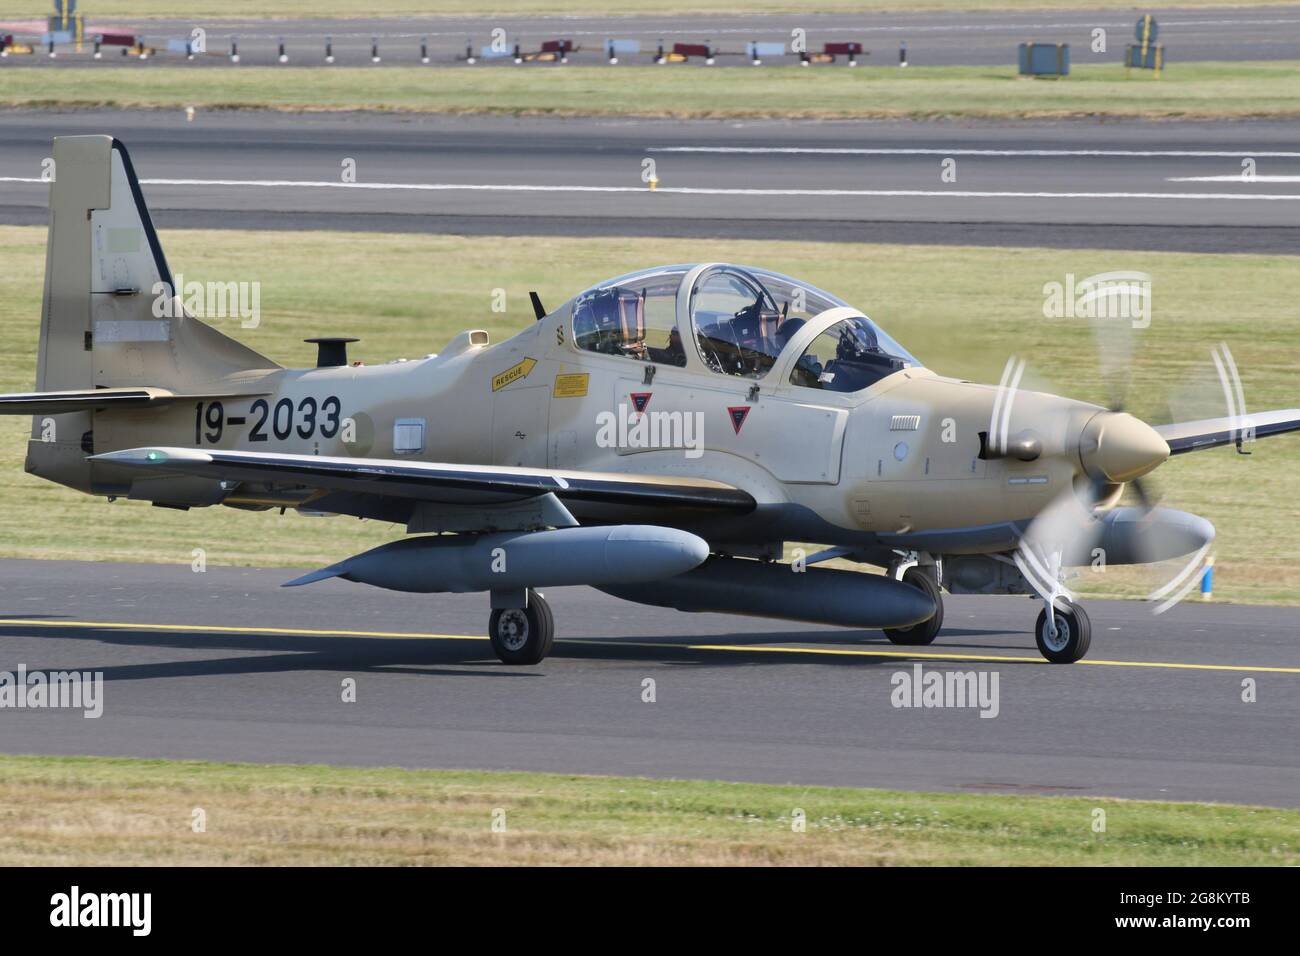 One of six Embraer A-29B Super Tucanos destined for the Nigerian Air Force (NAF), on departure from Prestwick International Airport on 20 July 2021. The aircraft was on a delivery flight from the USA to Nigeria, and wore a temporary US military serial (19-2033) for the flight. This particular airframe will become NAF845 in Nigerian Air Force service. Stock Photo